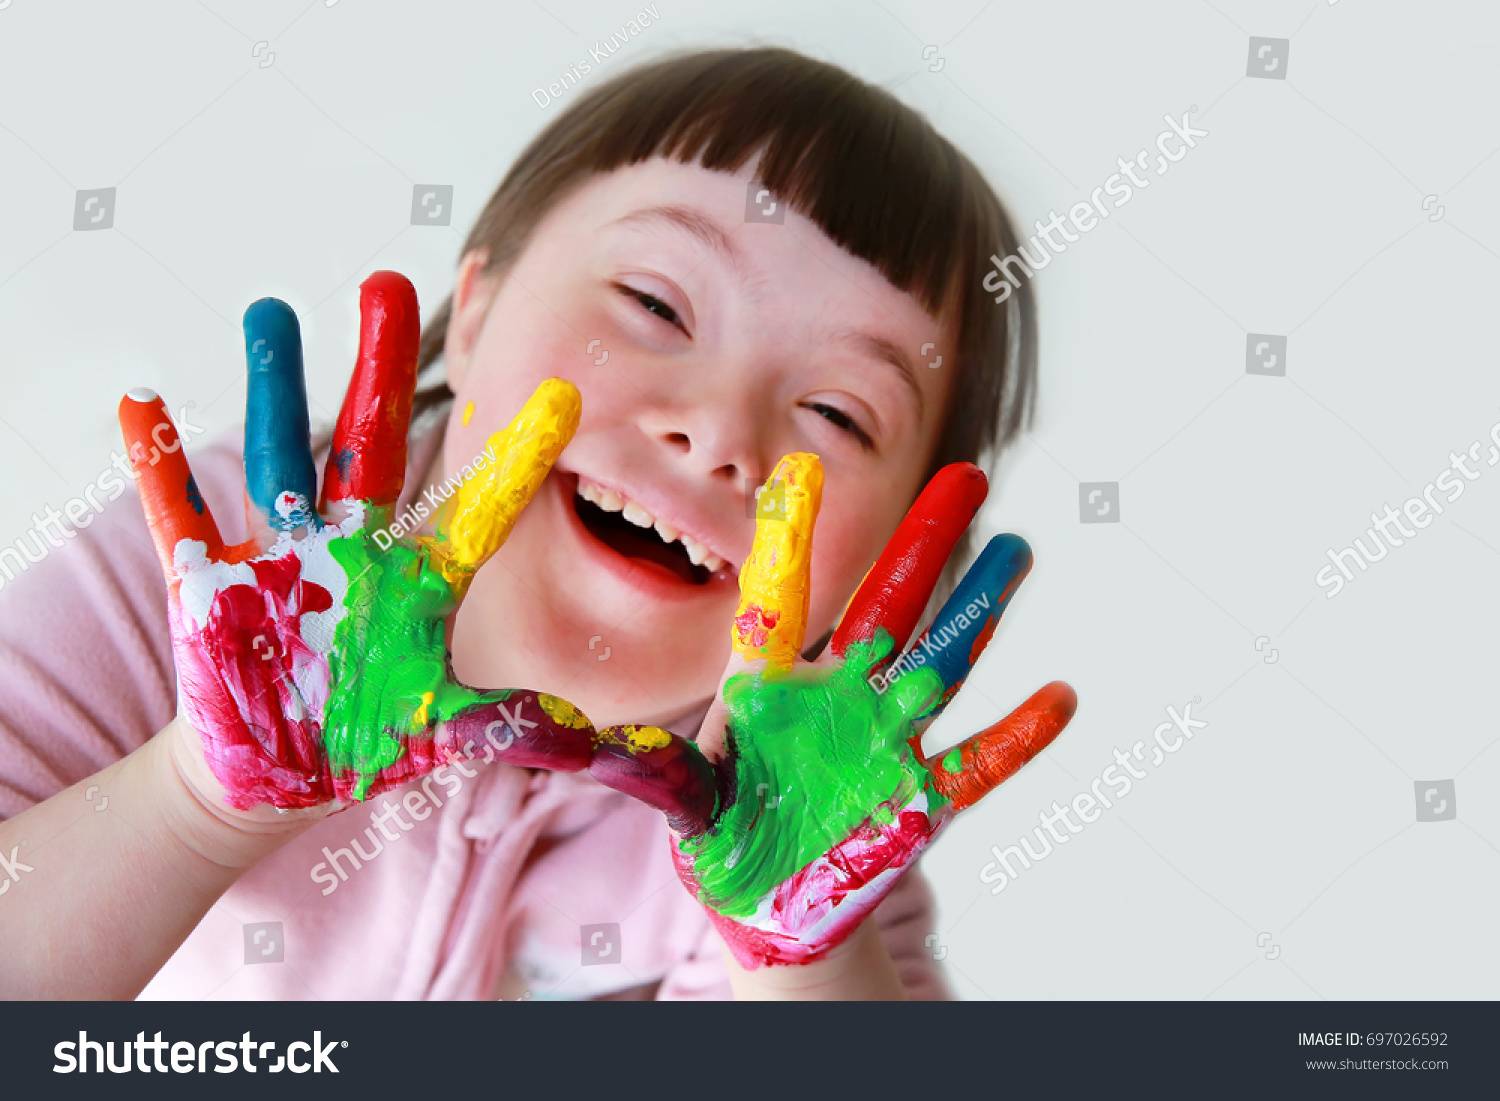 Cute little down syndrome girl with painted hands. #697026592